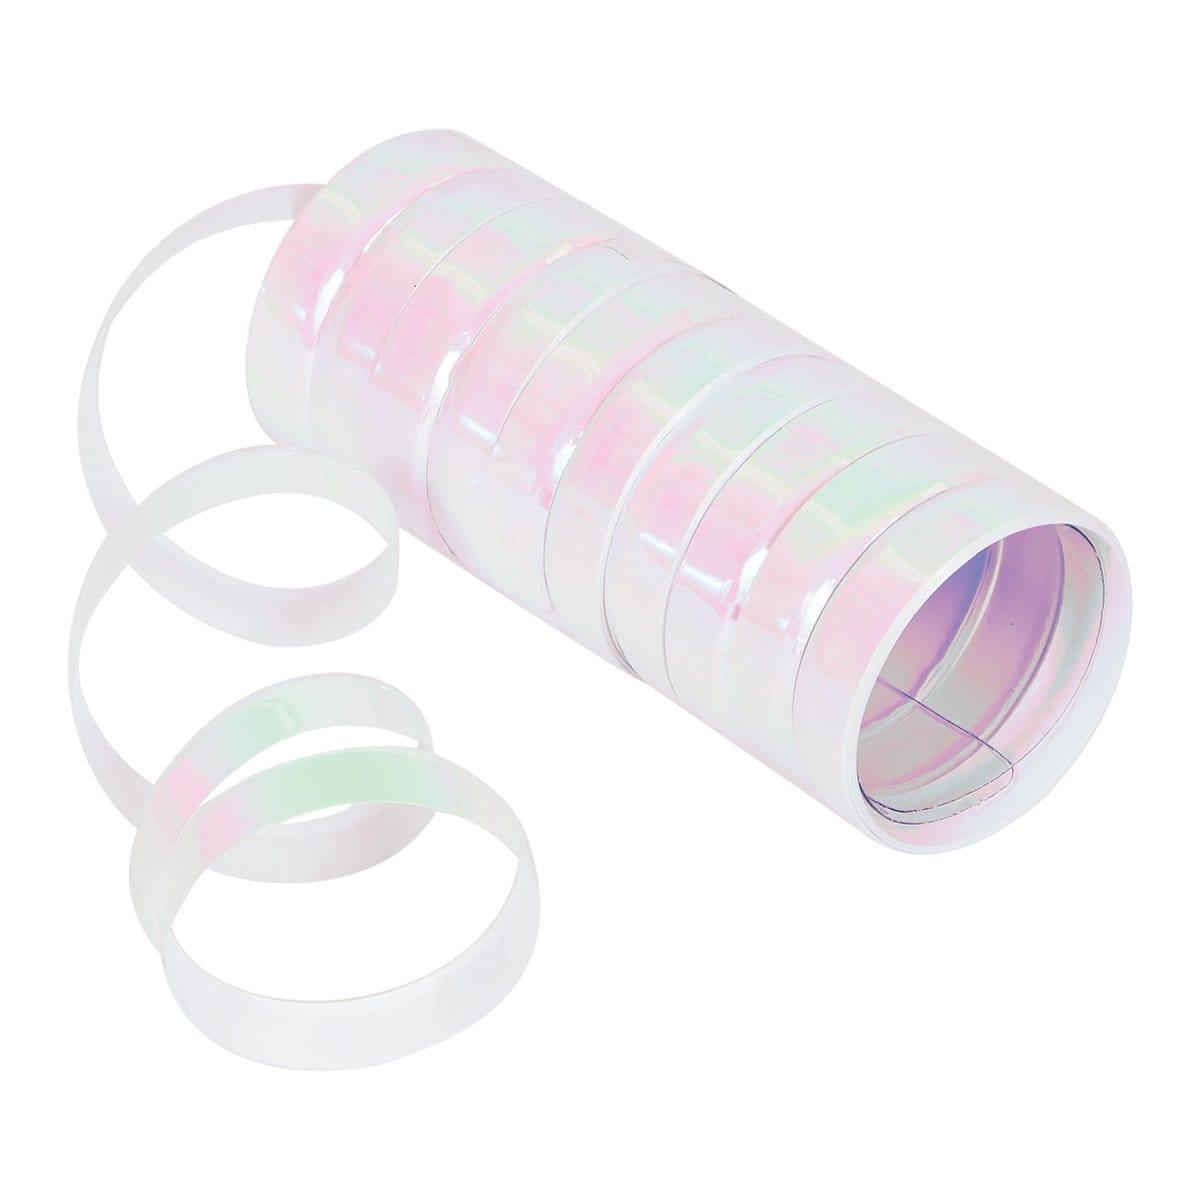 Buy Everyday Entertaining Iridescent Ribbon sold at Party Expert